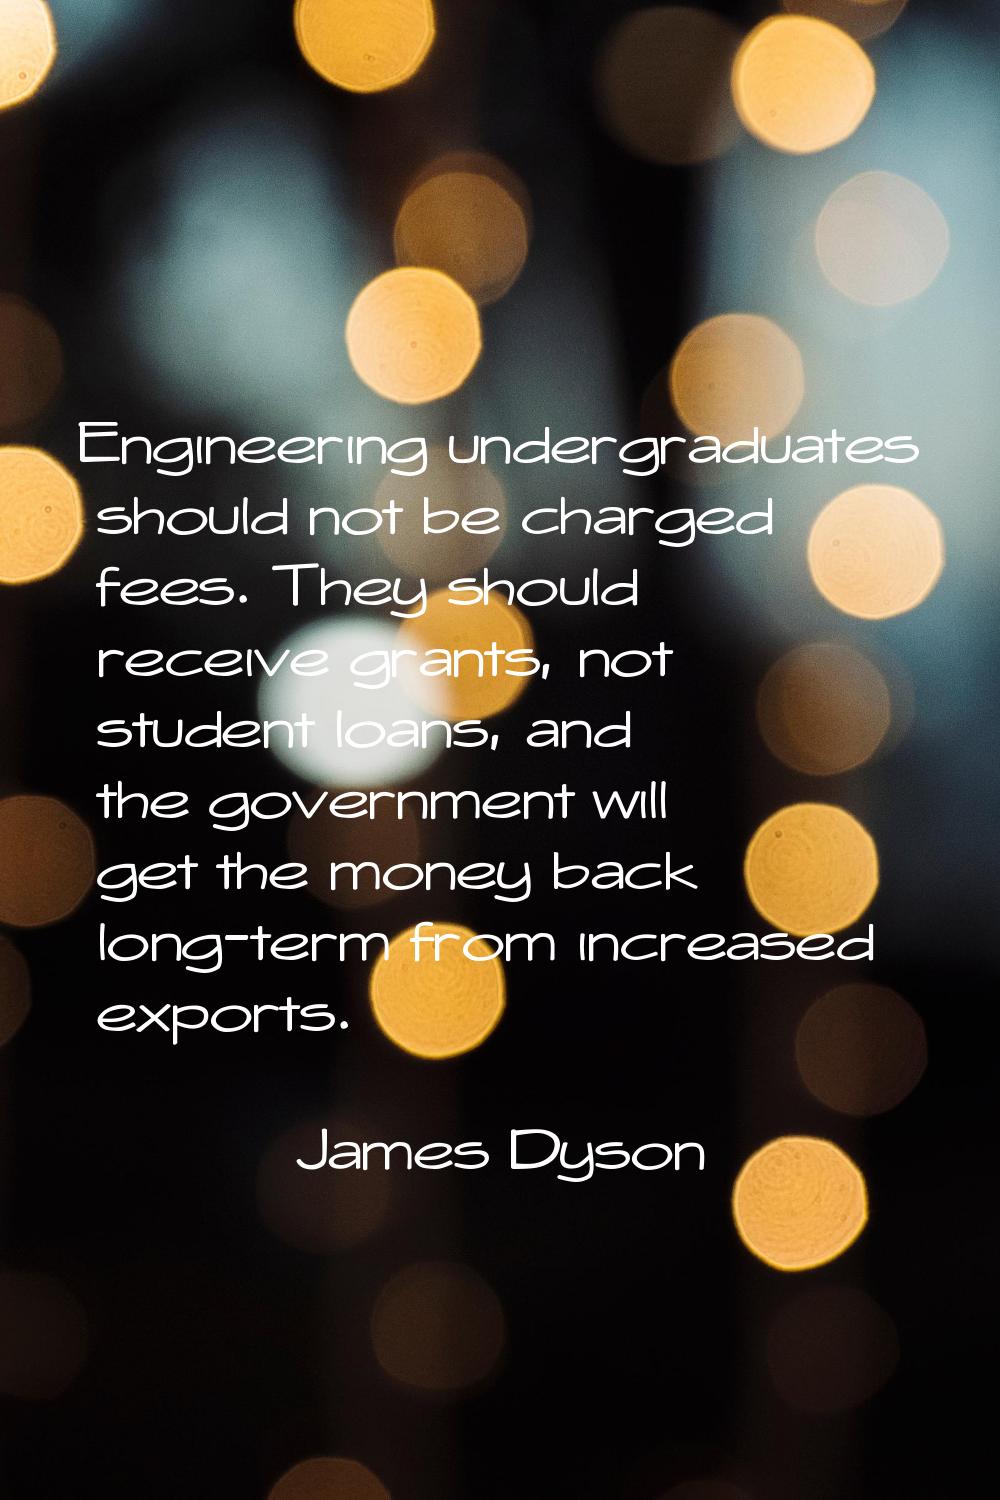 Engineering undergraduates should not be charged fees. They should receive grants, not student loan